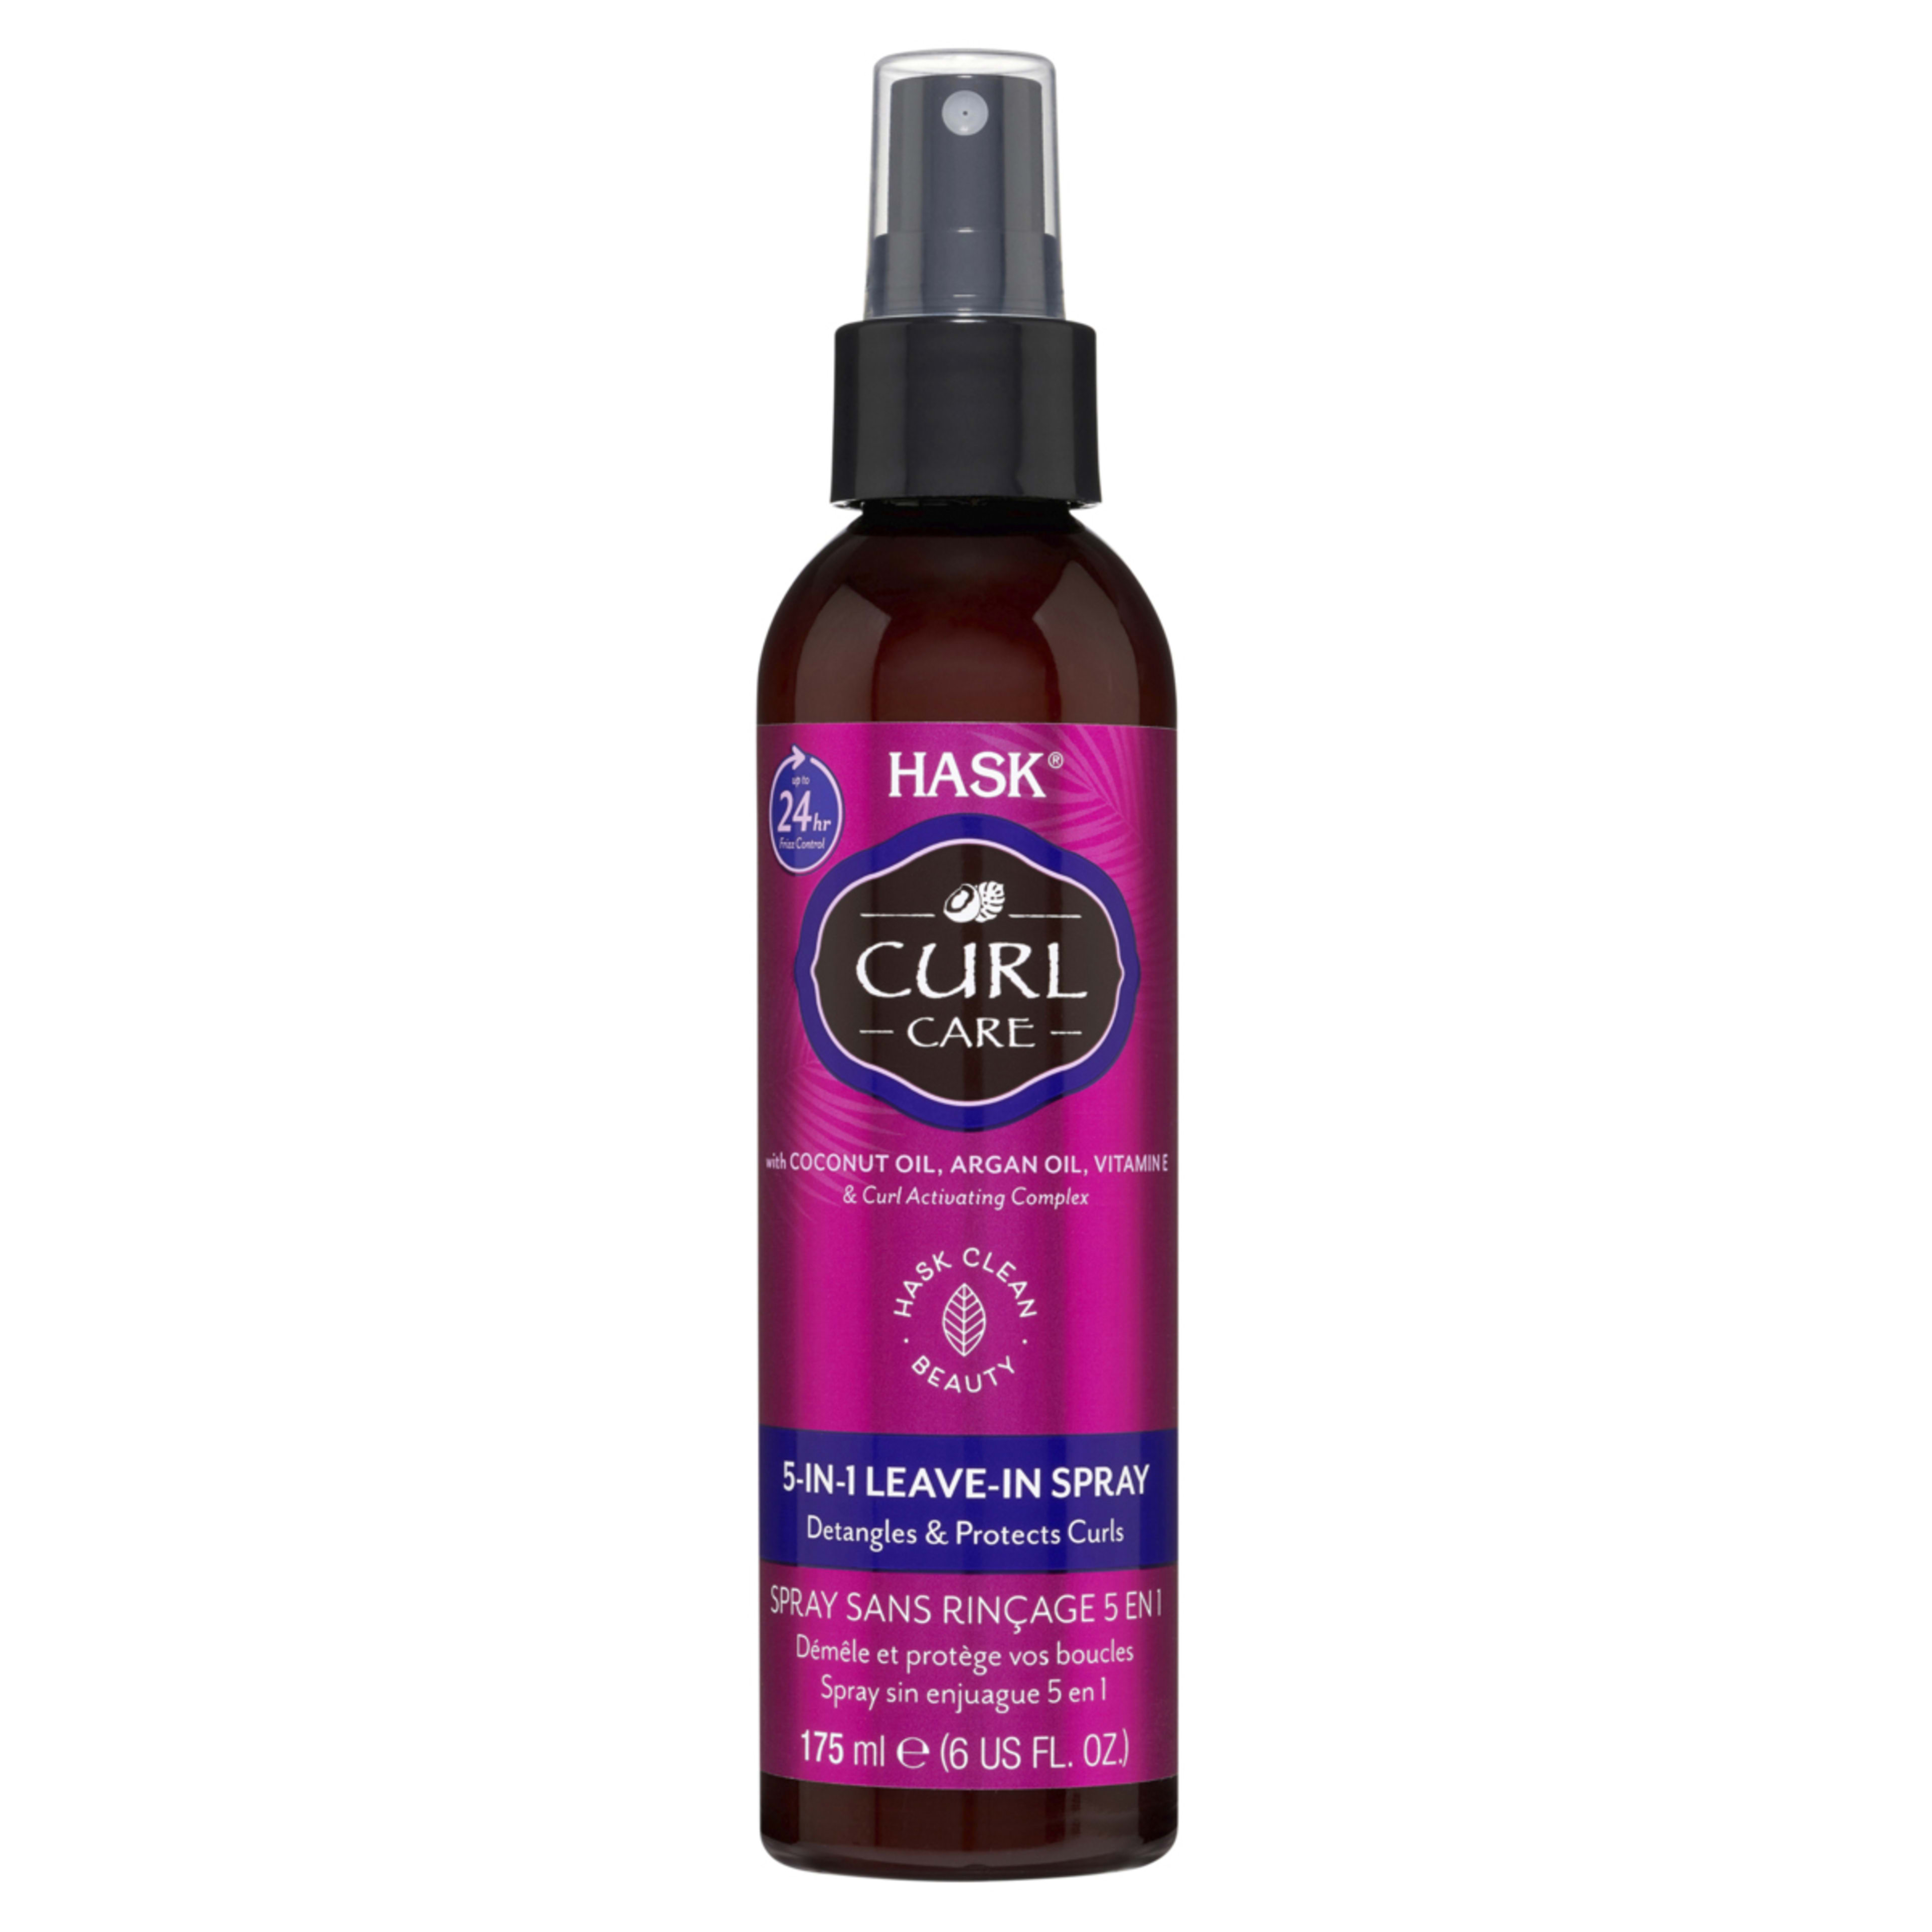 HASK Curl Care 5-in-1 Leave-in Spray 175ml - Coconut Oil, Argan Oil, Vitamin E and Curl Activating Complex